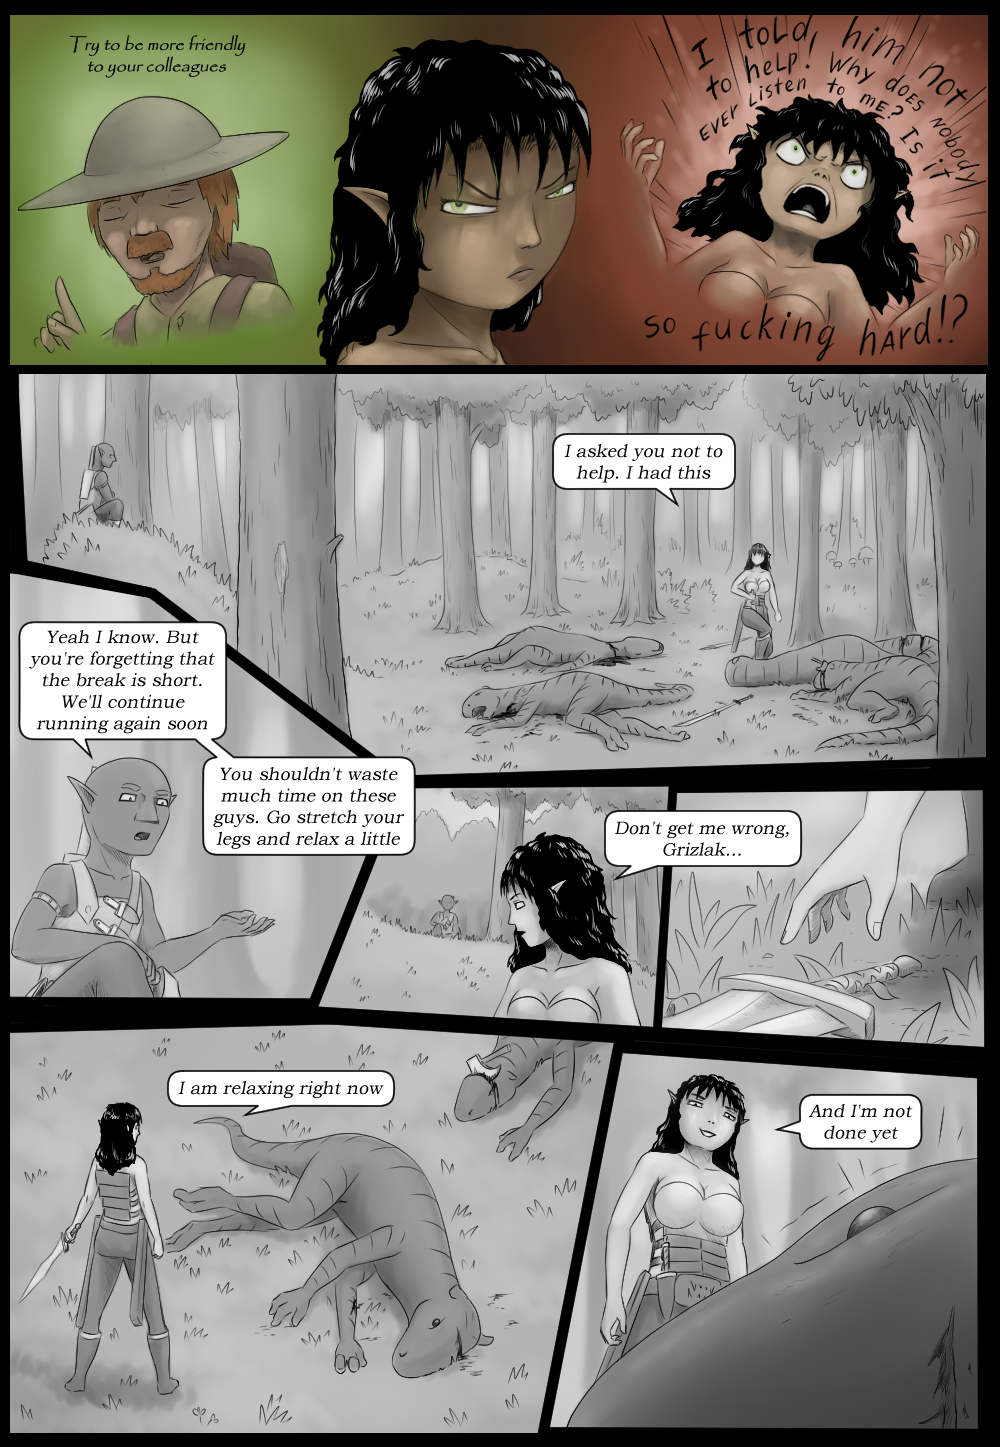 Page 47 - Not Done yet